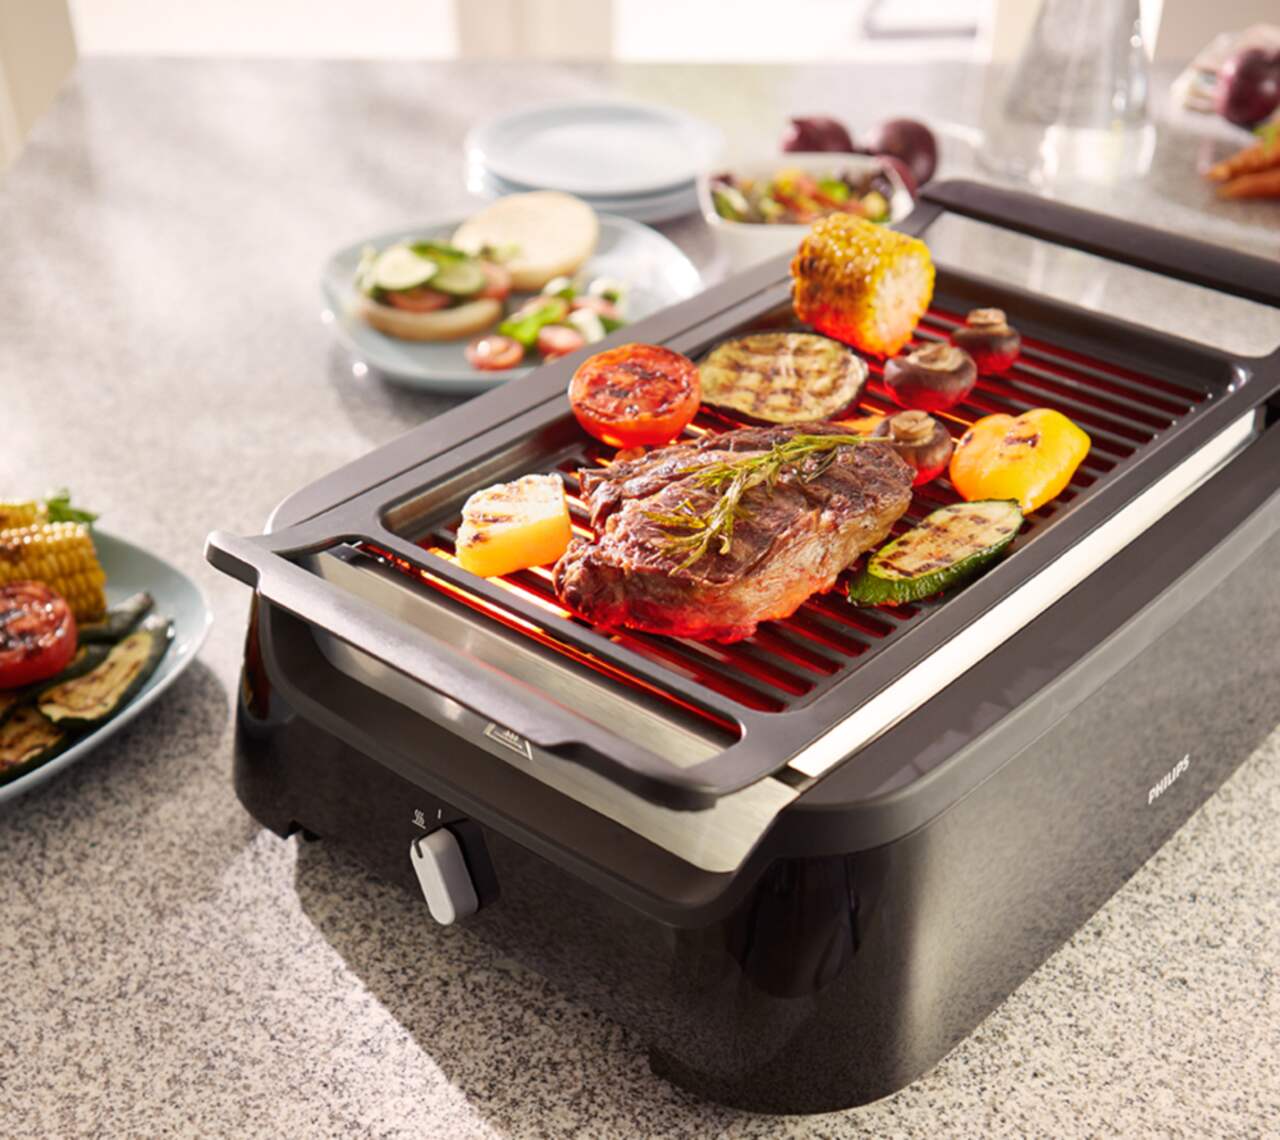 https://media-www.canadiantire.ca/product/living/kitchen/kitchen-appliances/0430051/philips-avance-smokeless-bbq-grill-ac0609af-7f2d-4990-bd24-e37216a2999d.png?imdensity=1&imwidth=1244&impolicy=mZoom